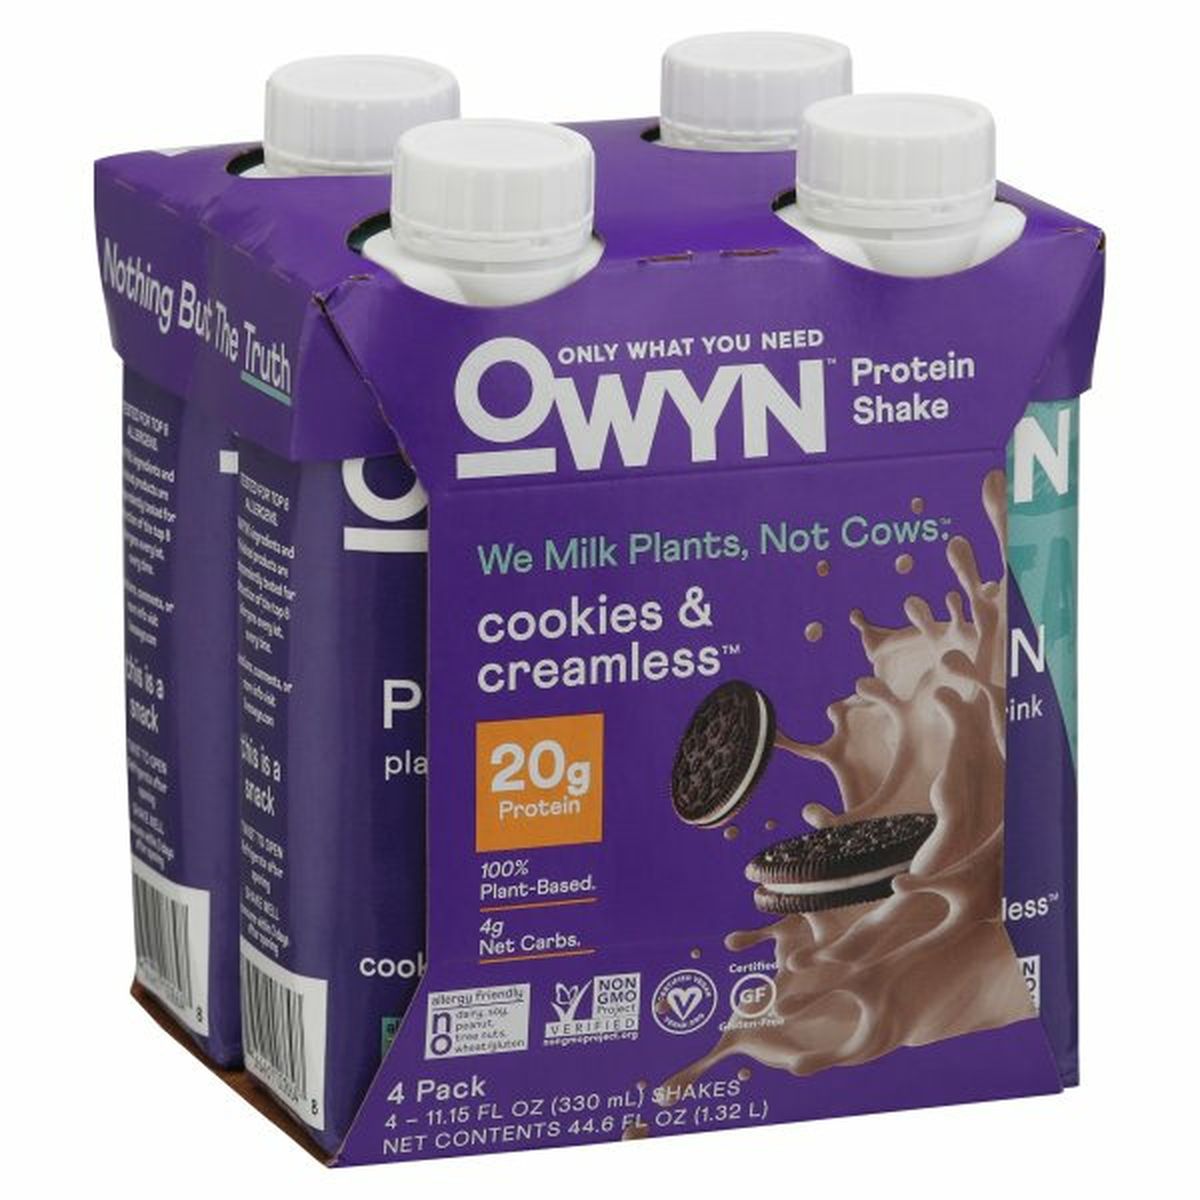 Calories in Owyn Protein Shake, Cookies & Creamless, 4 Pack